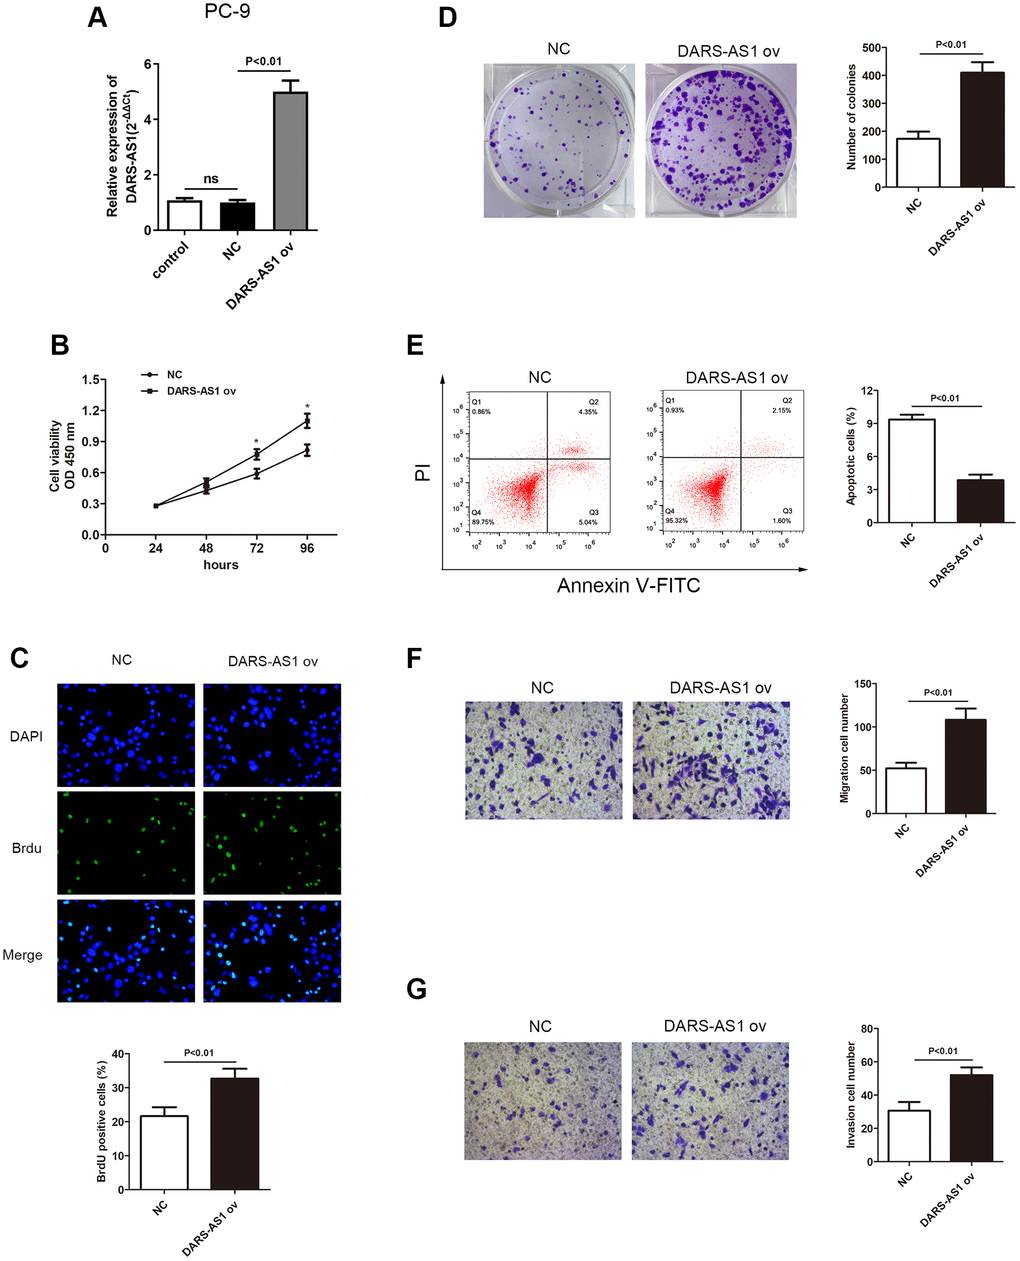 Overexpression of DARS-AS1 resulted in accelerated LUAD progression. (A) Expression of DARS-AS1 was significantly higher in PC-9 cells transfected with DARS-AS1 ov compared to the NC group (p B) PC-9 cells with DARS-AS1 ov transfection exhibited greater proliferative capability according to the (B) CCK-8 (p C) BrdU (p D) colony formation (p E) Flow cytometry results showed a significantly lower apoptosis rate in the DARS-AS1 ov transfection group (upper right quadrant + lower right quadrant) compared to the NC group (p F) migrating (p G) invading (p 